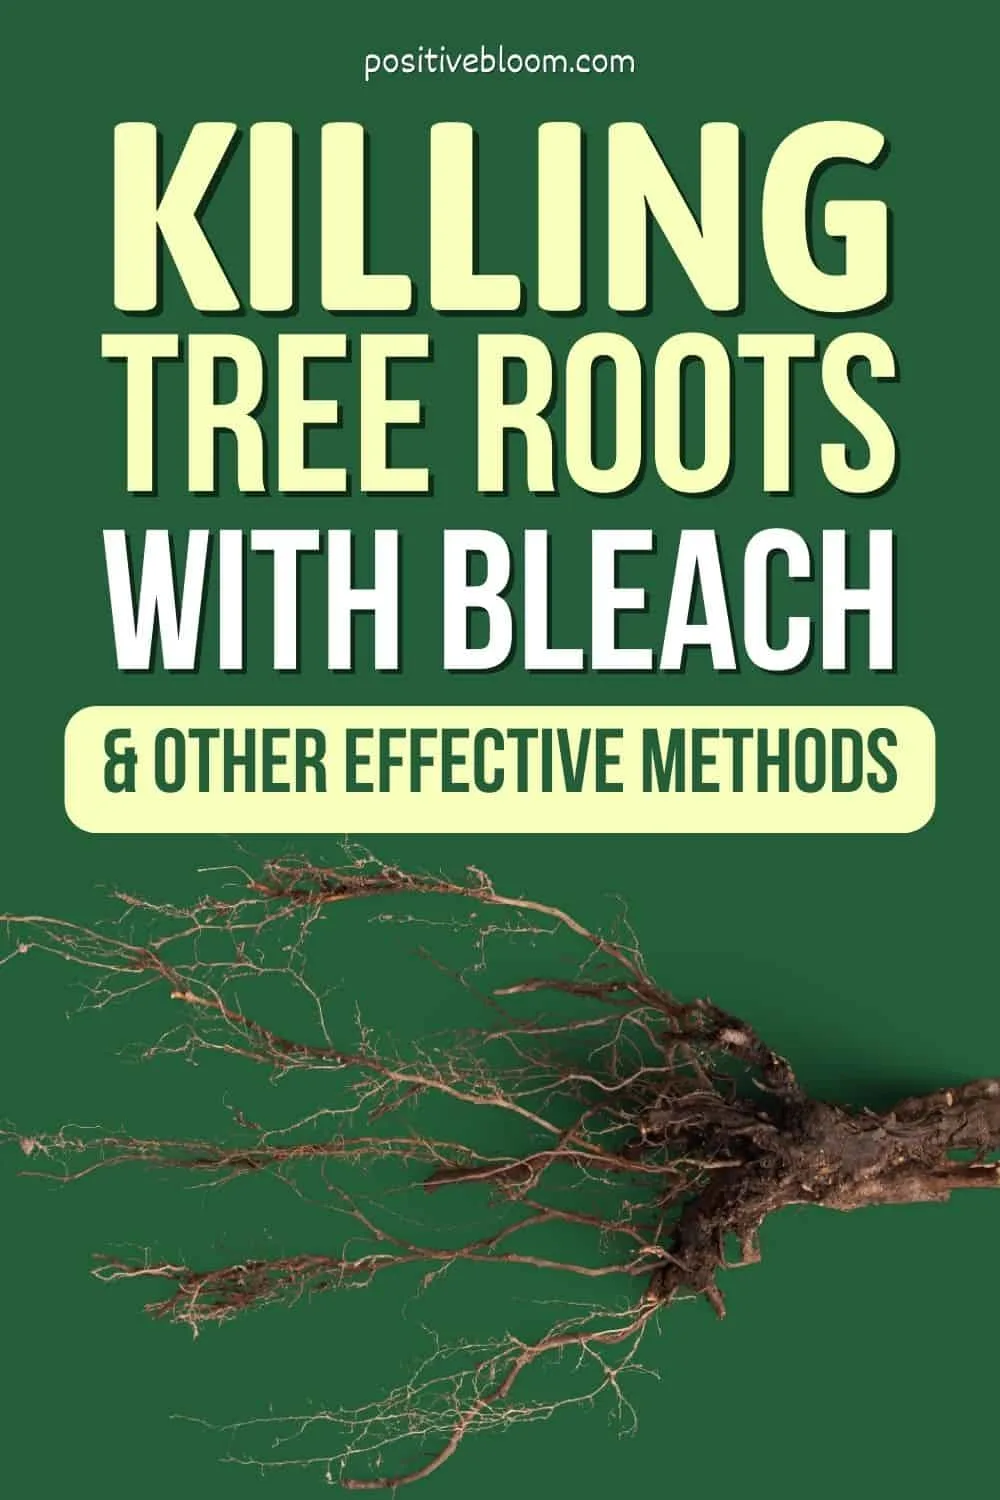 Killing Tree Roots With Bleach & Other Effective Methods Pinterest